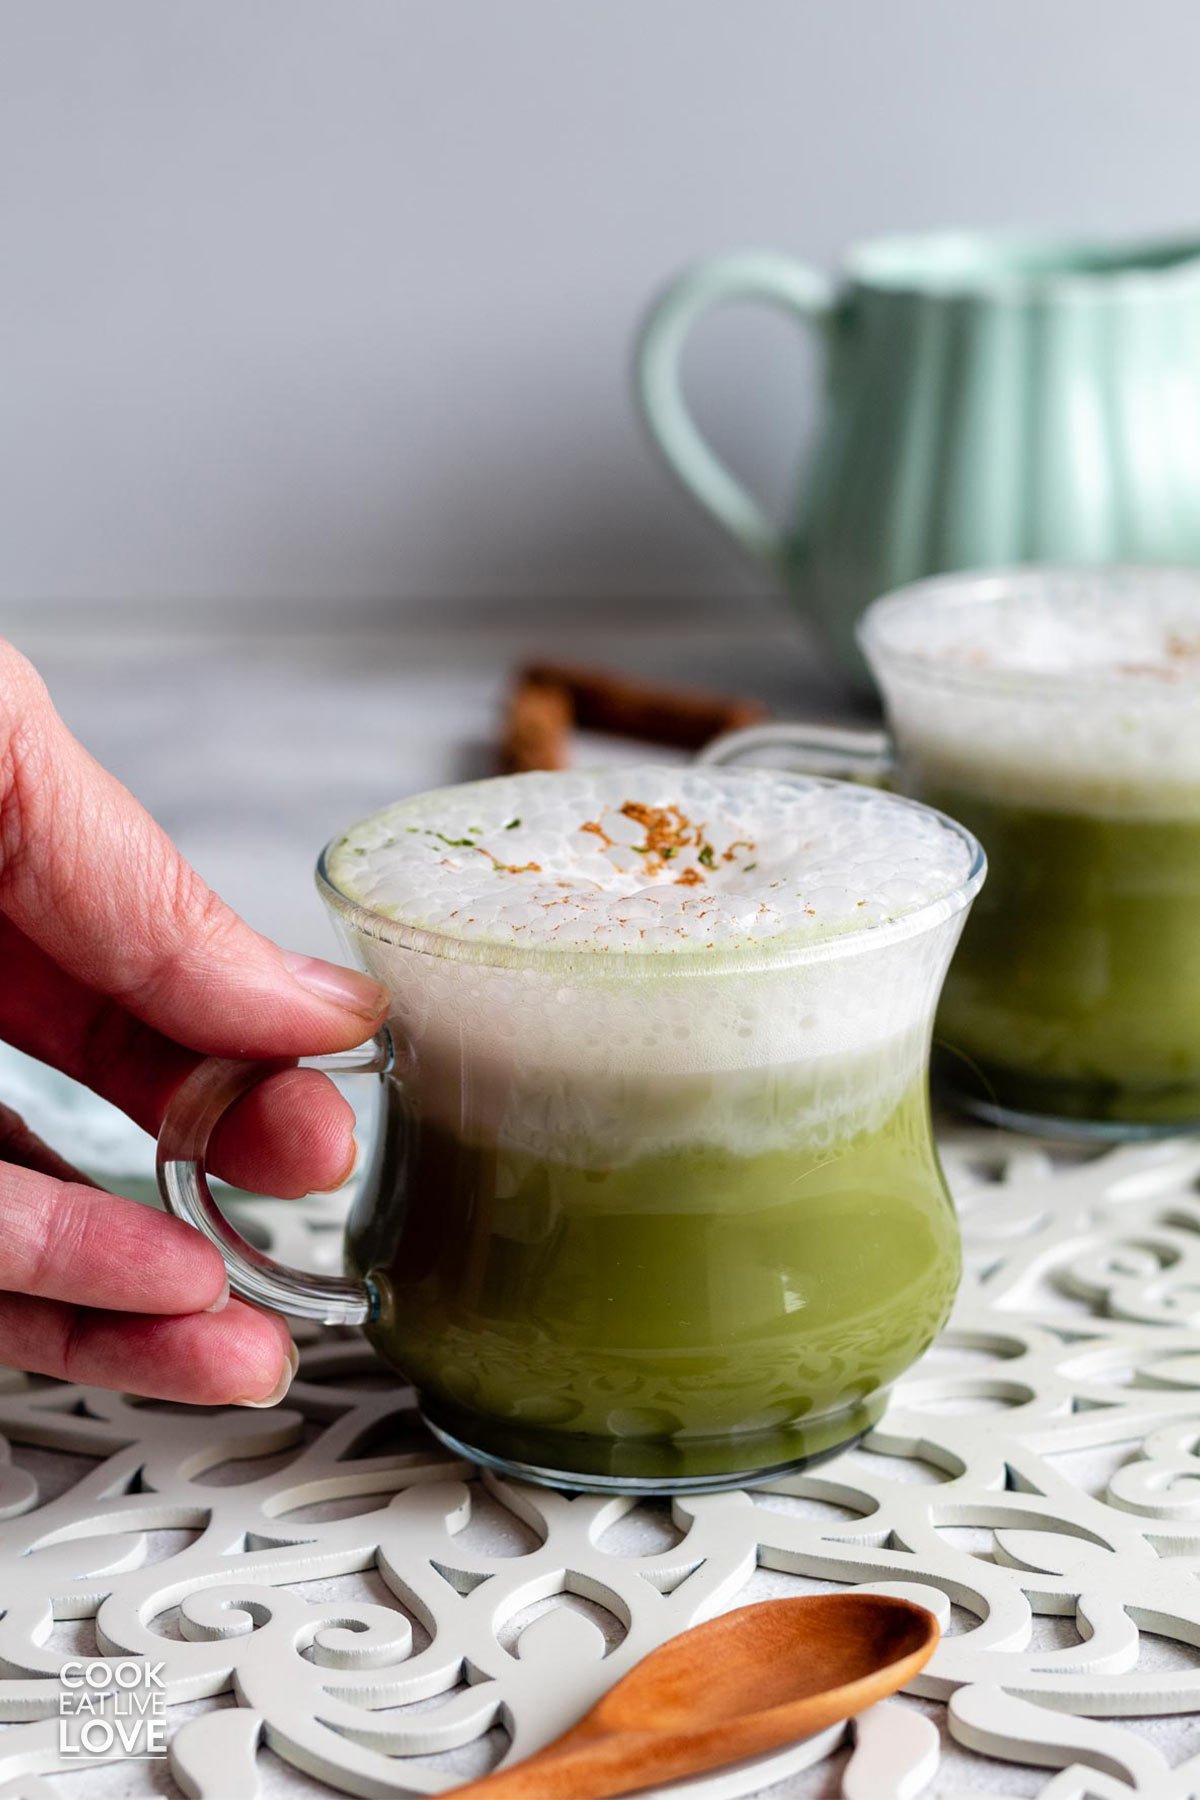 A hand reaching in to grab the handle of a mug of chai matcha latte.